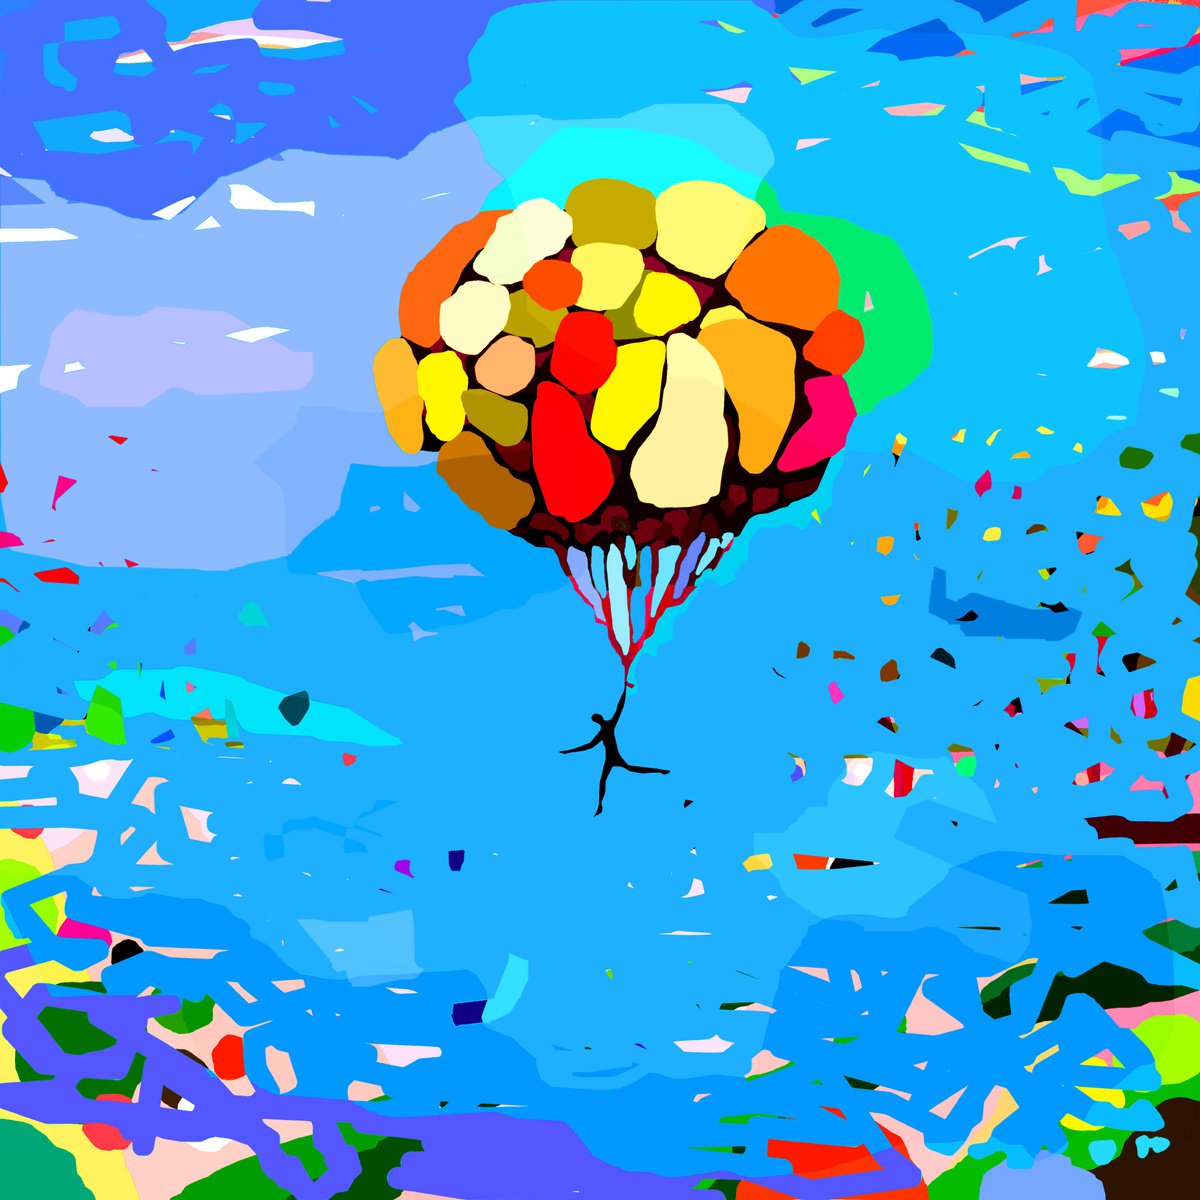 The Balloon of the Good Retirement Park (pop art, skyscape) by Alejos